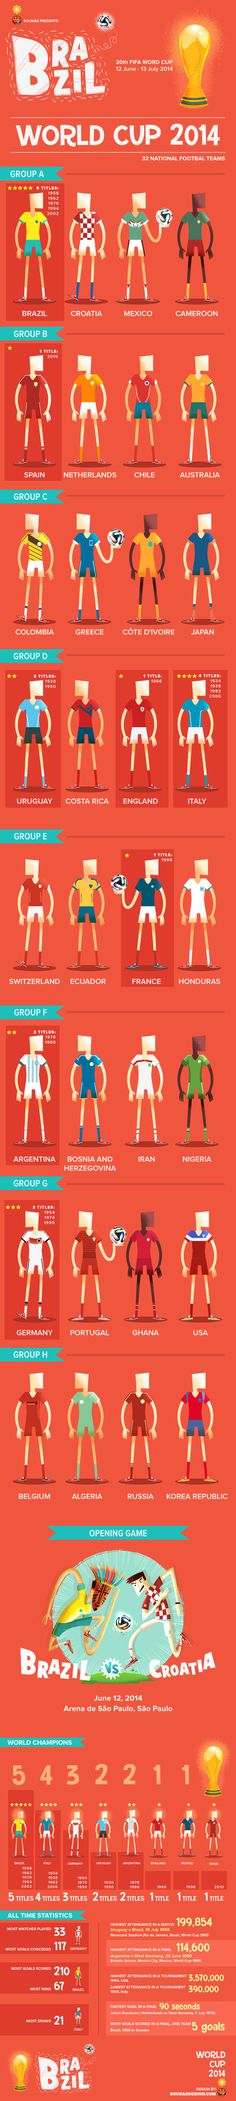 :::World Cup 2014 infographic::: | Ilias Sounas #infographic #world #2014 #brazil #cup